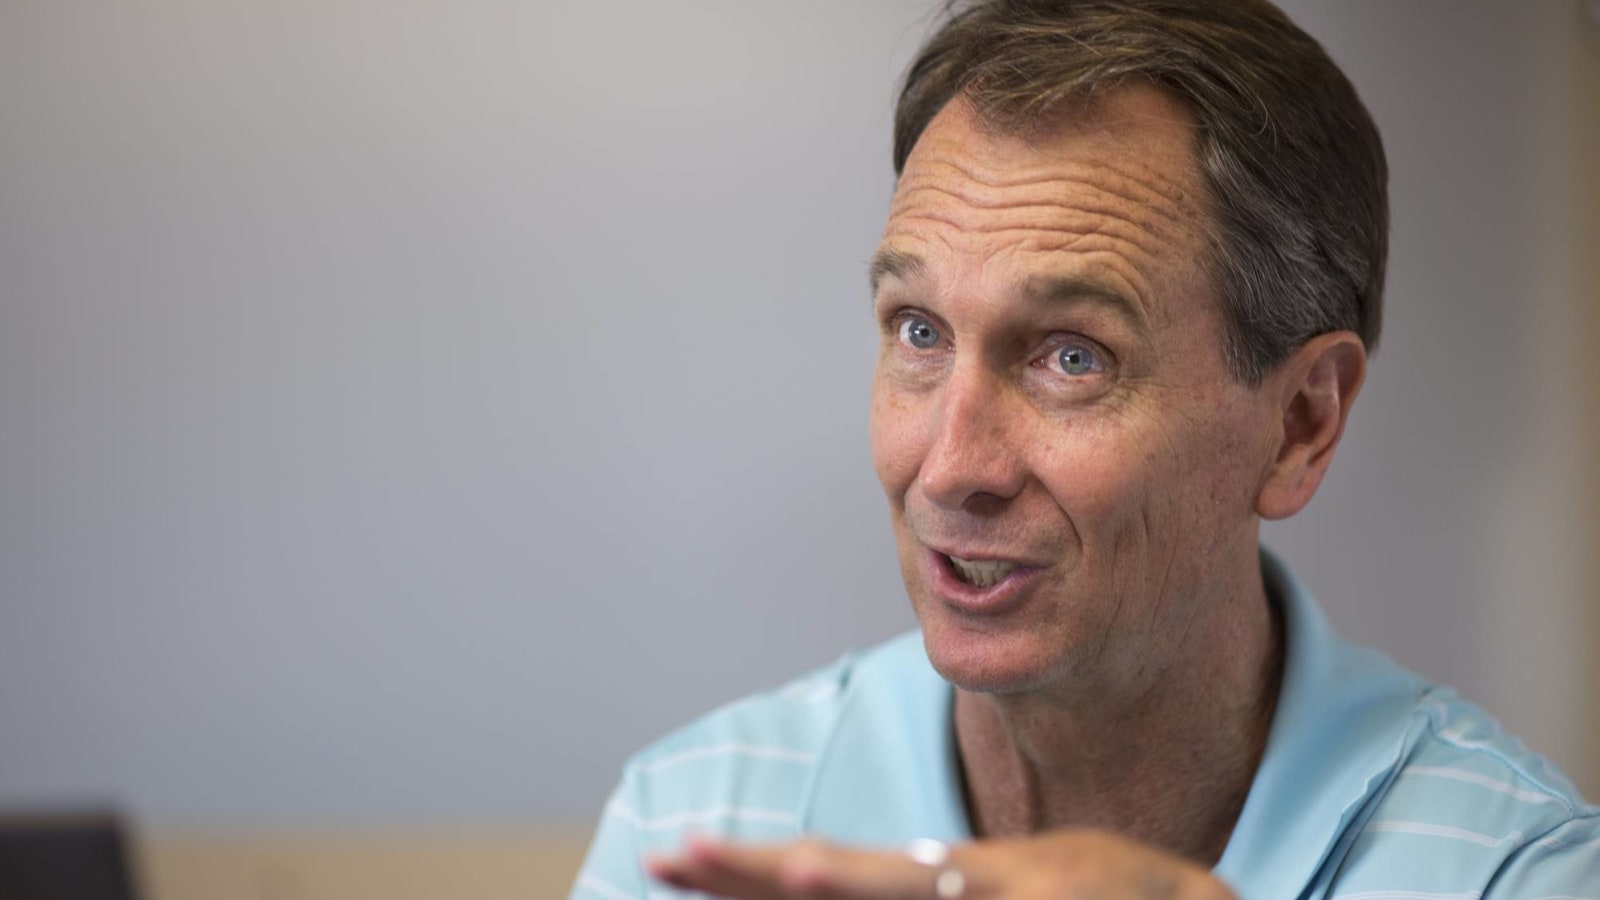 Cris Collinsworth dismisses long-held myth about piles in football